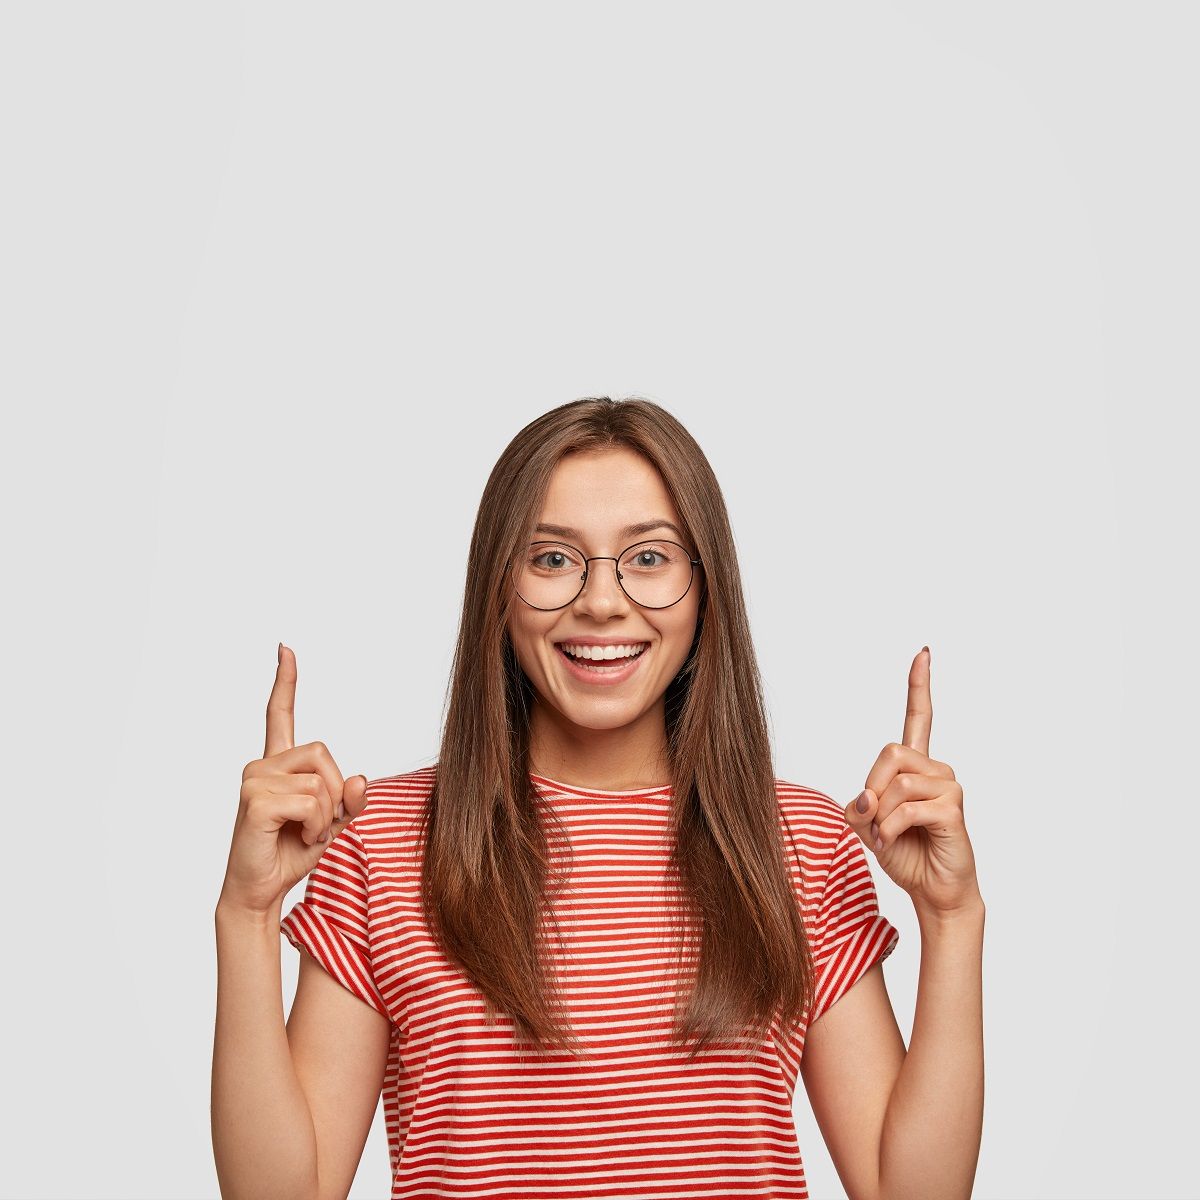 Dreamy positive woman with satisfied expression, points with both index fingers upwards, thinks about new possibilities, shows blank space for your advertisement, stands indoor. Look, big discounts